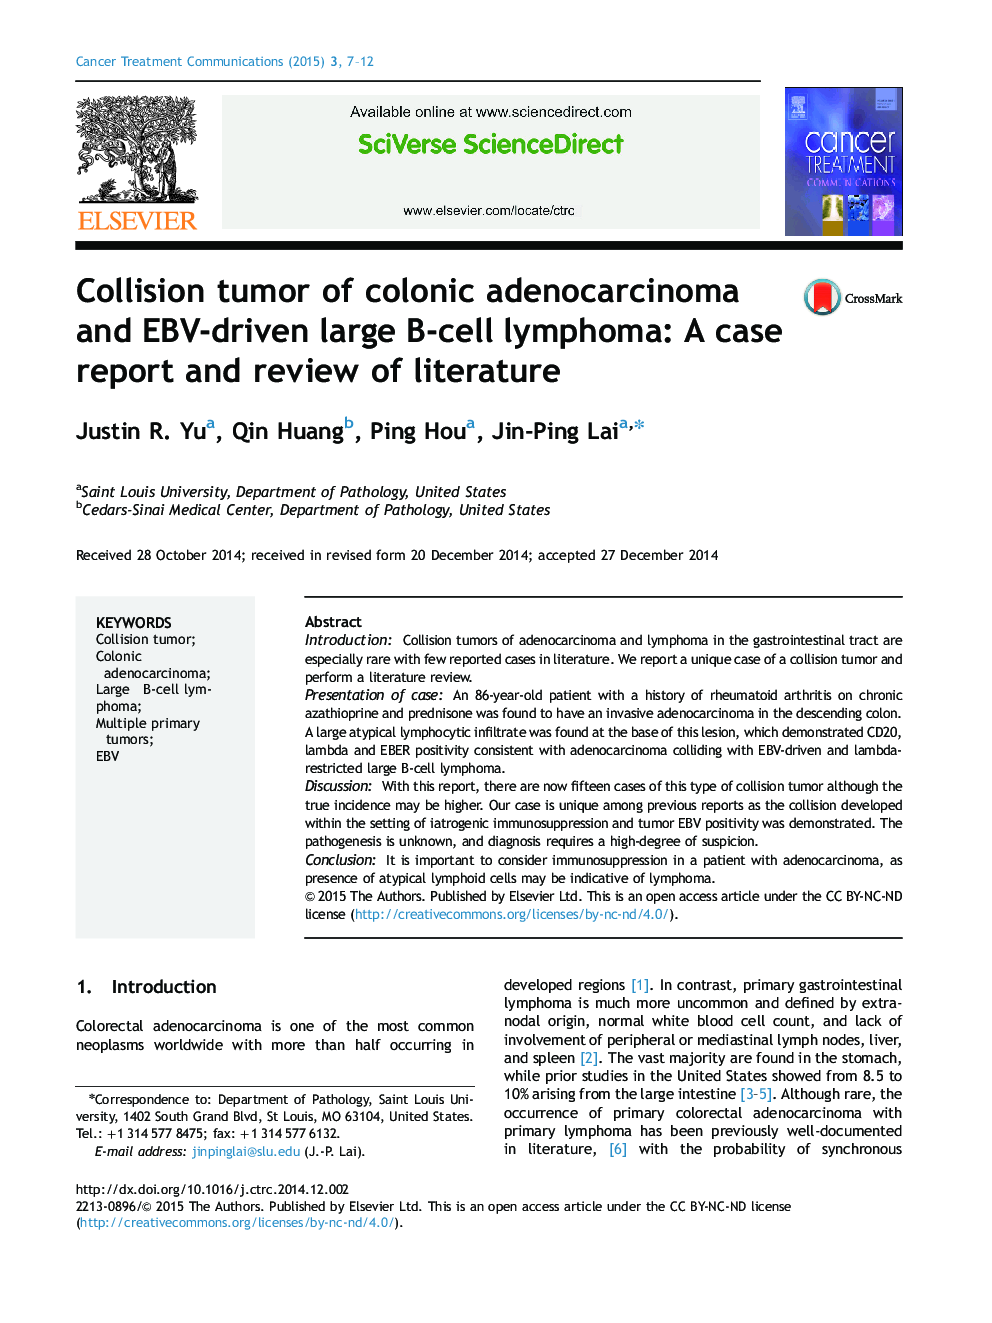 Collision tumor of colonic adenocarcinoma and EBV-driven large B-cell lymphoma: A case report and review of literature